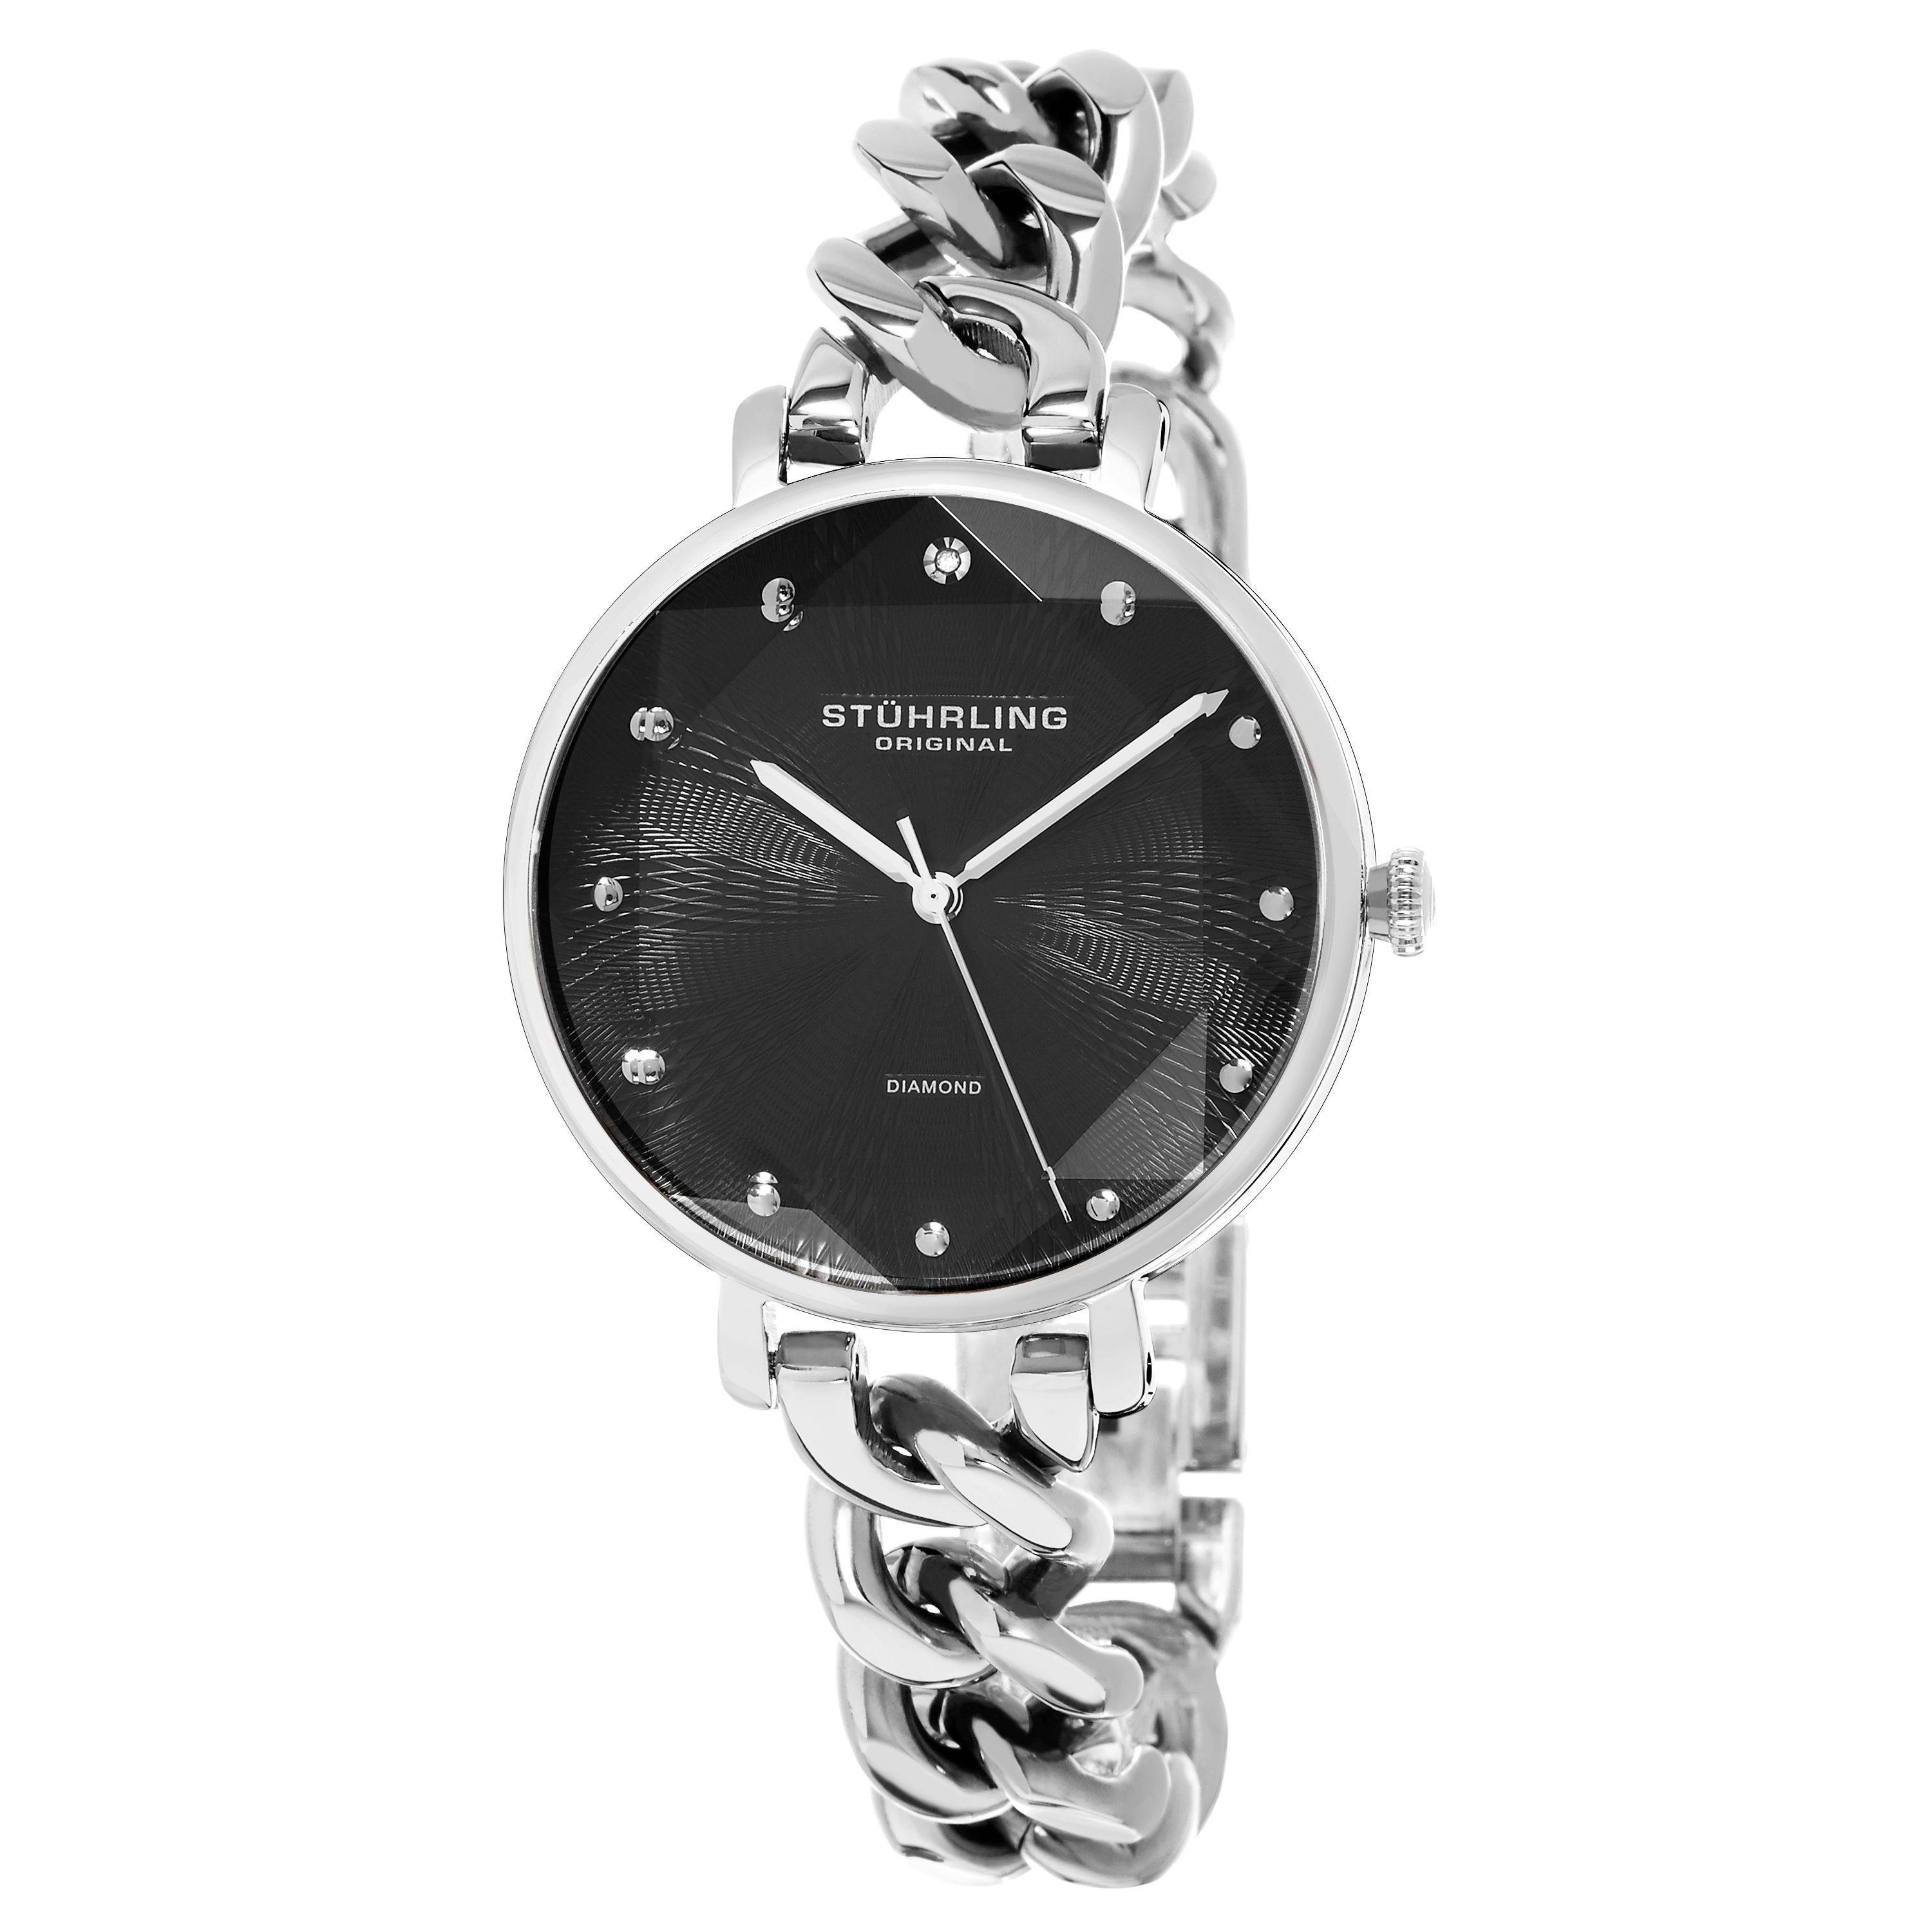 Women's Quartz Silver Case, Faceted Crystal, Black Dial with Diamond Accents, Silver Link Chain Bracelet Watch